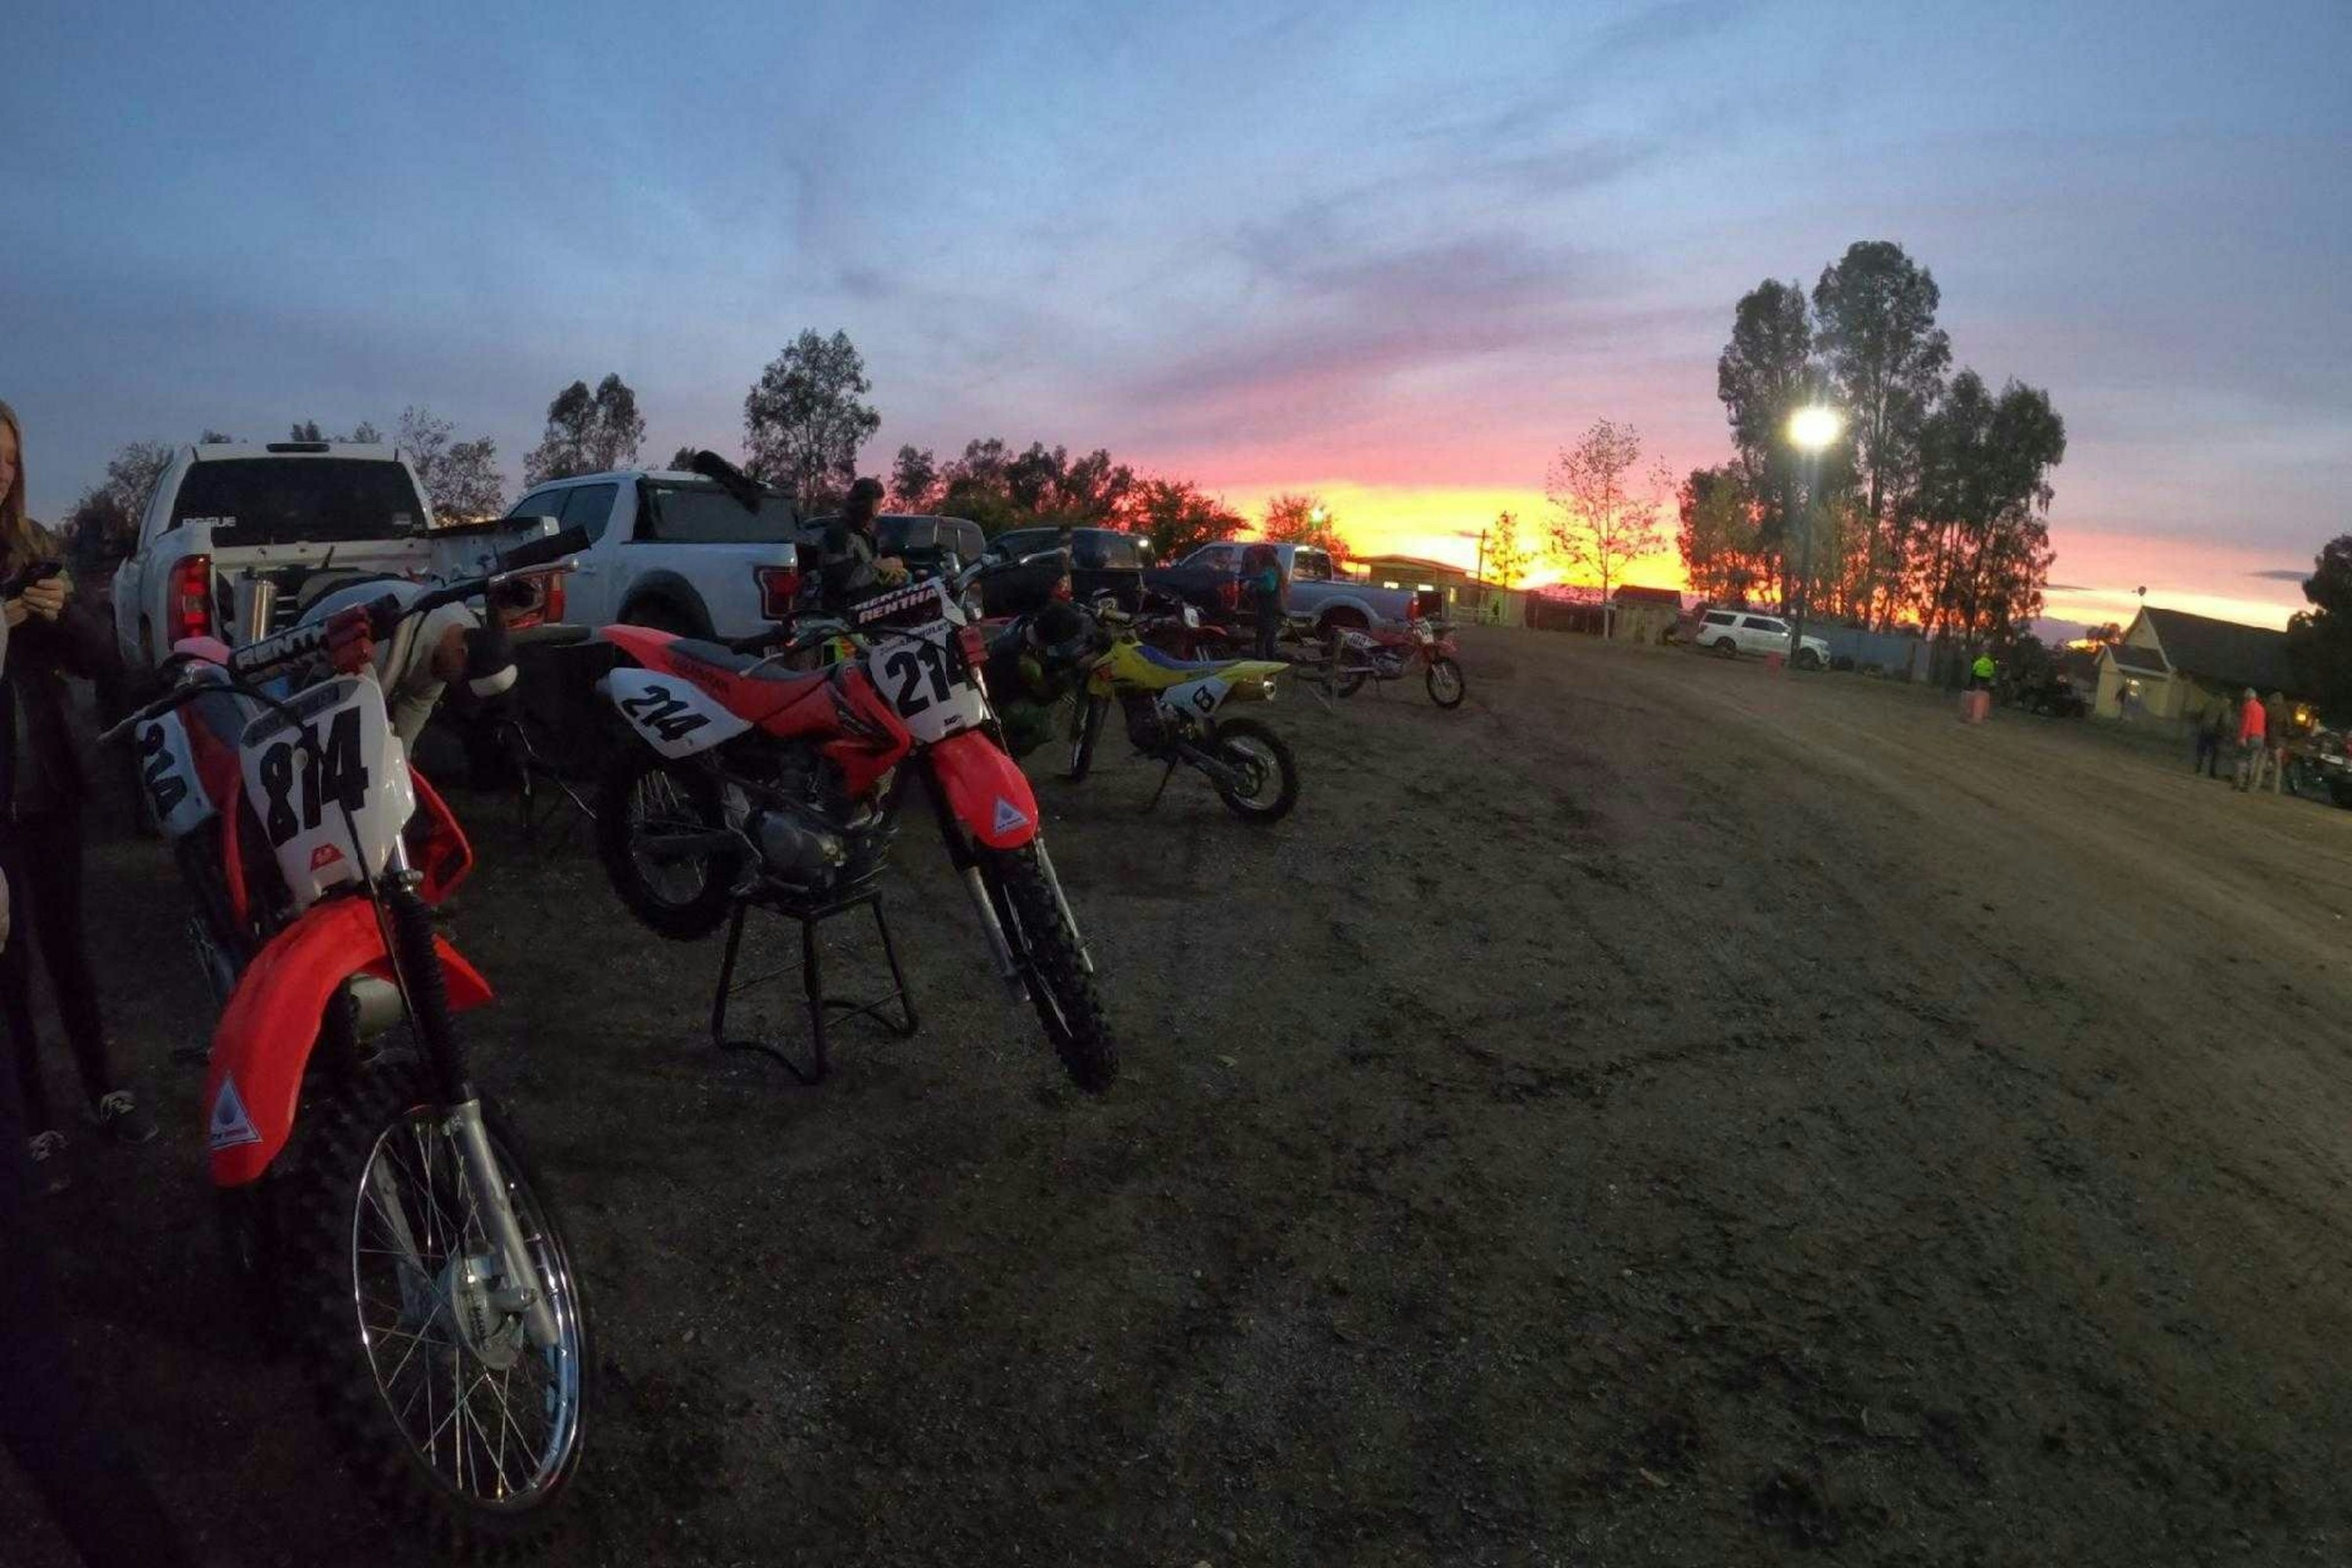 Riding Dirt Bikes Is About Shared Experiences More Than Anything - Racer X